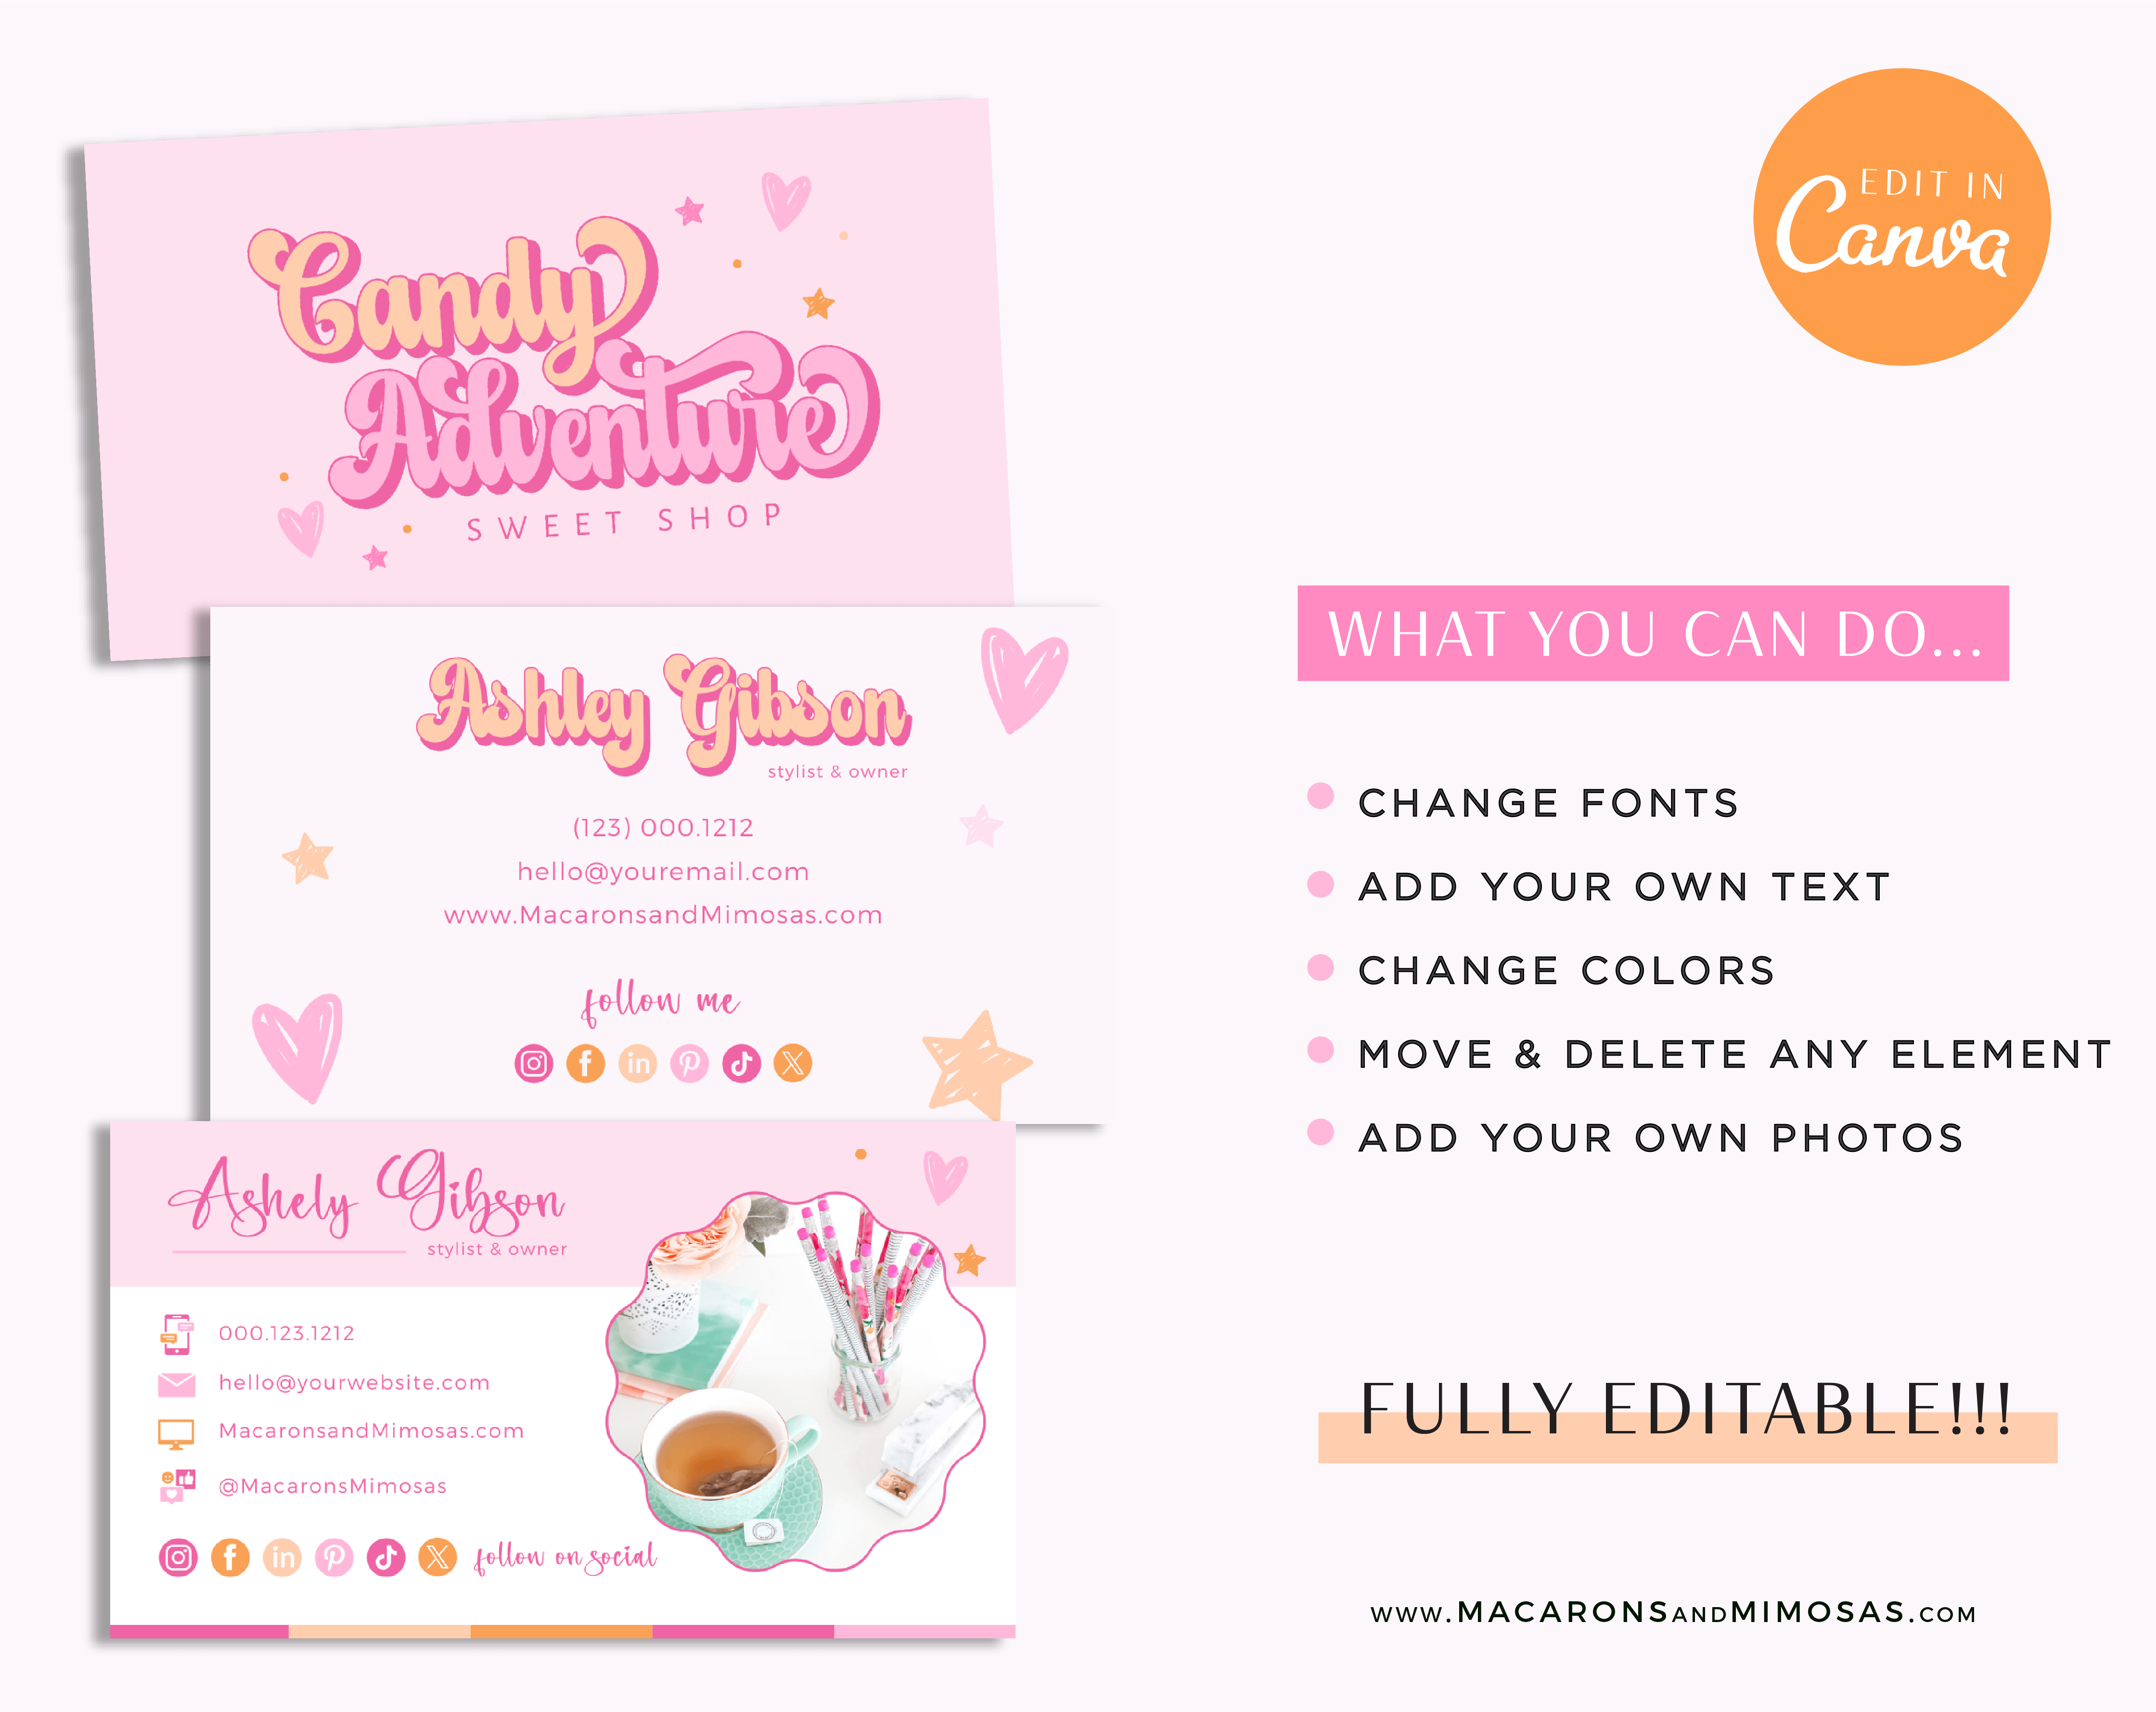 Rainbow Business Card Canva Template. DIY bright boho card design features hears, stars and a retro bubble font combination.